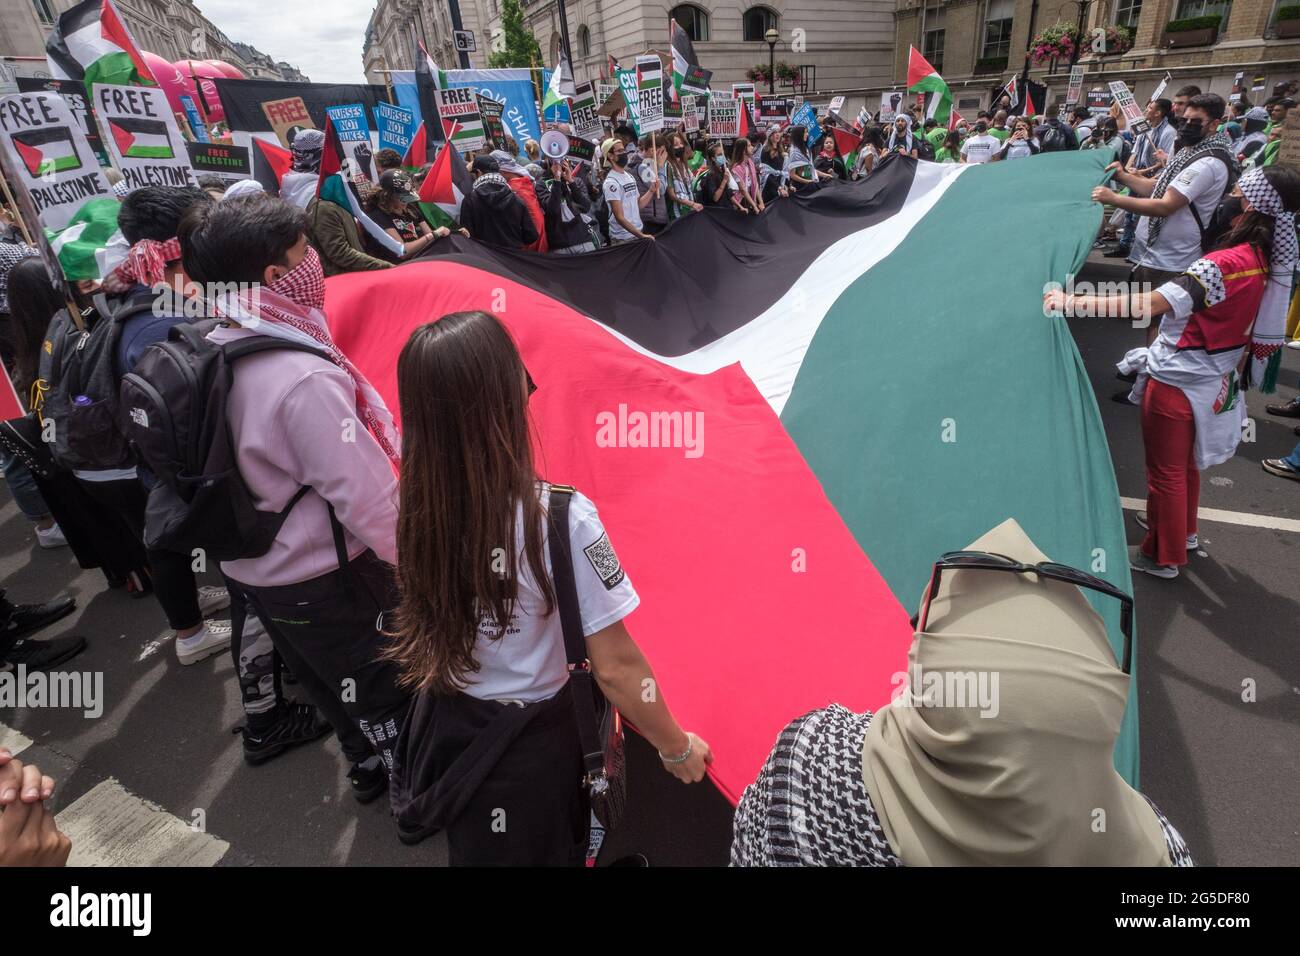 London, UK. 26th June 2021. People with giant Palestinian flag. Over five thousand joined the People's Assembly march through London against the failures of the Tory government during the pandemic, acting too late, handing out contracts to cronies and failing to reward key workers for their sacrifices. They demanded a 'new normal' with an end to NHS privatisation, decent housing, real action over climate change, decent housing, an end to unfair employment practices and the sacking of corrupt politicians. Peter Marshall/Alamy Live News Stock Photo